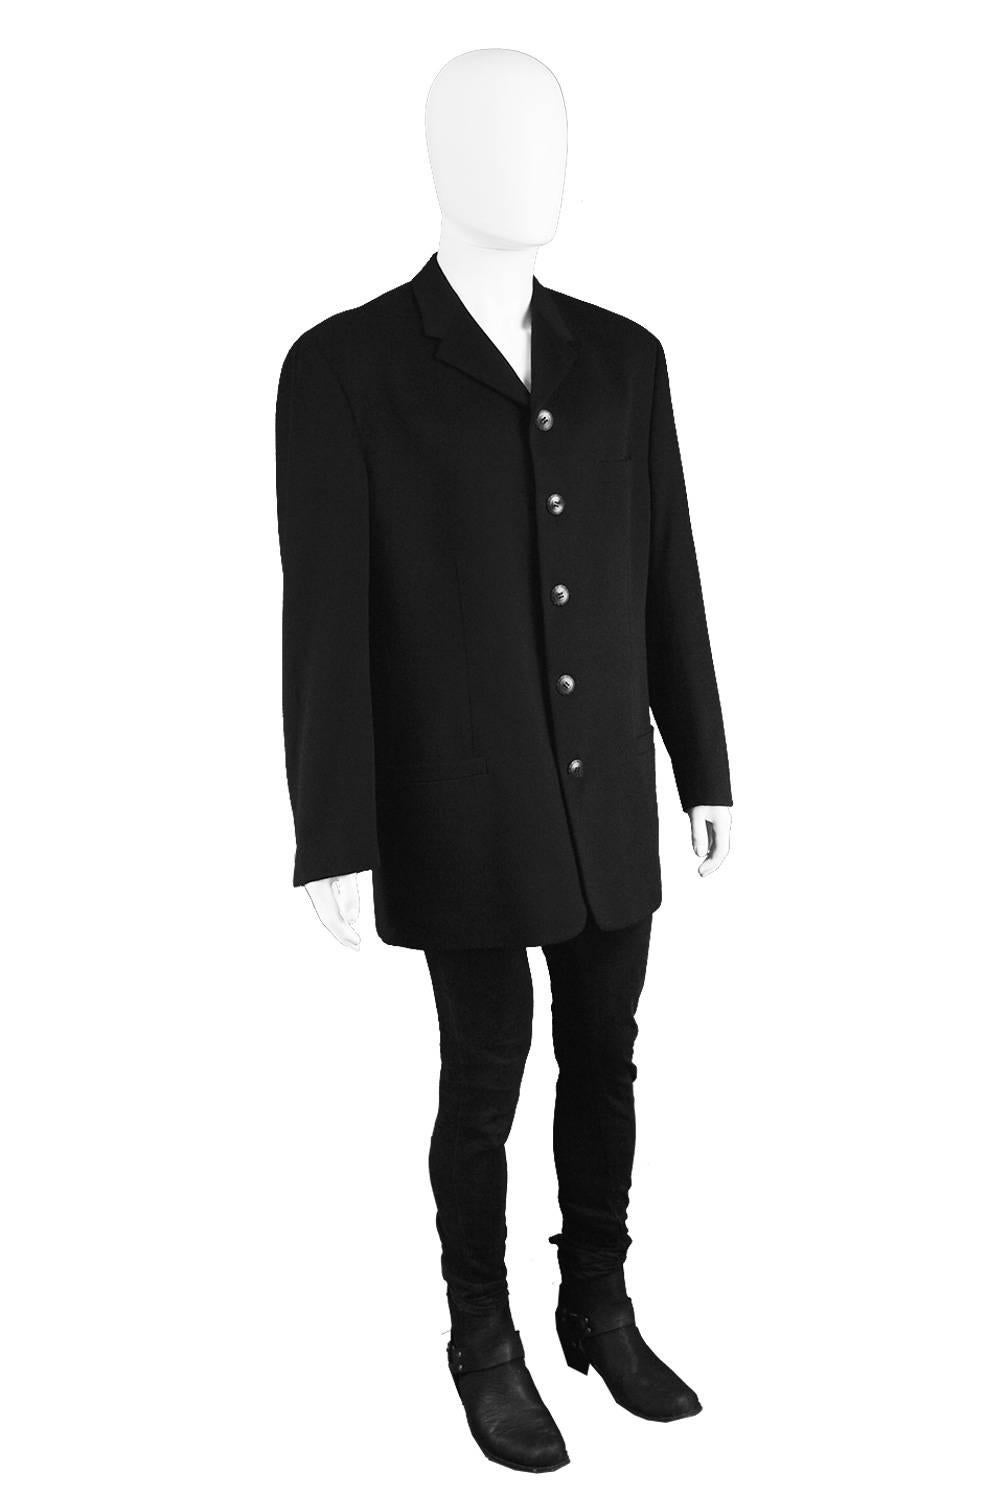 Gianni Versace Vintage Men's Black Wool Five Button Blazer Jacket, 1990s In Excellent Condition For Sale In Doncaster, South Yorkshire